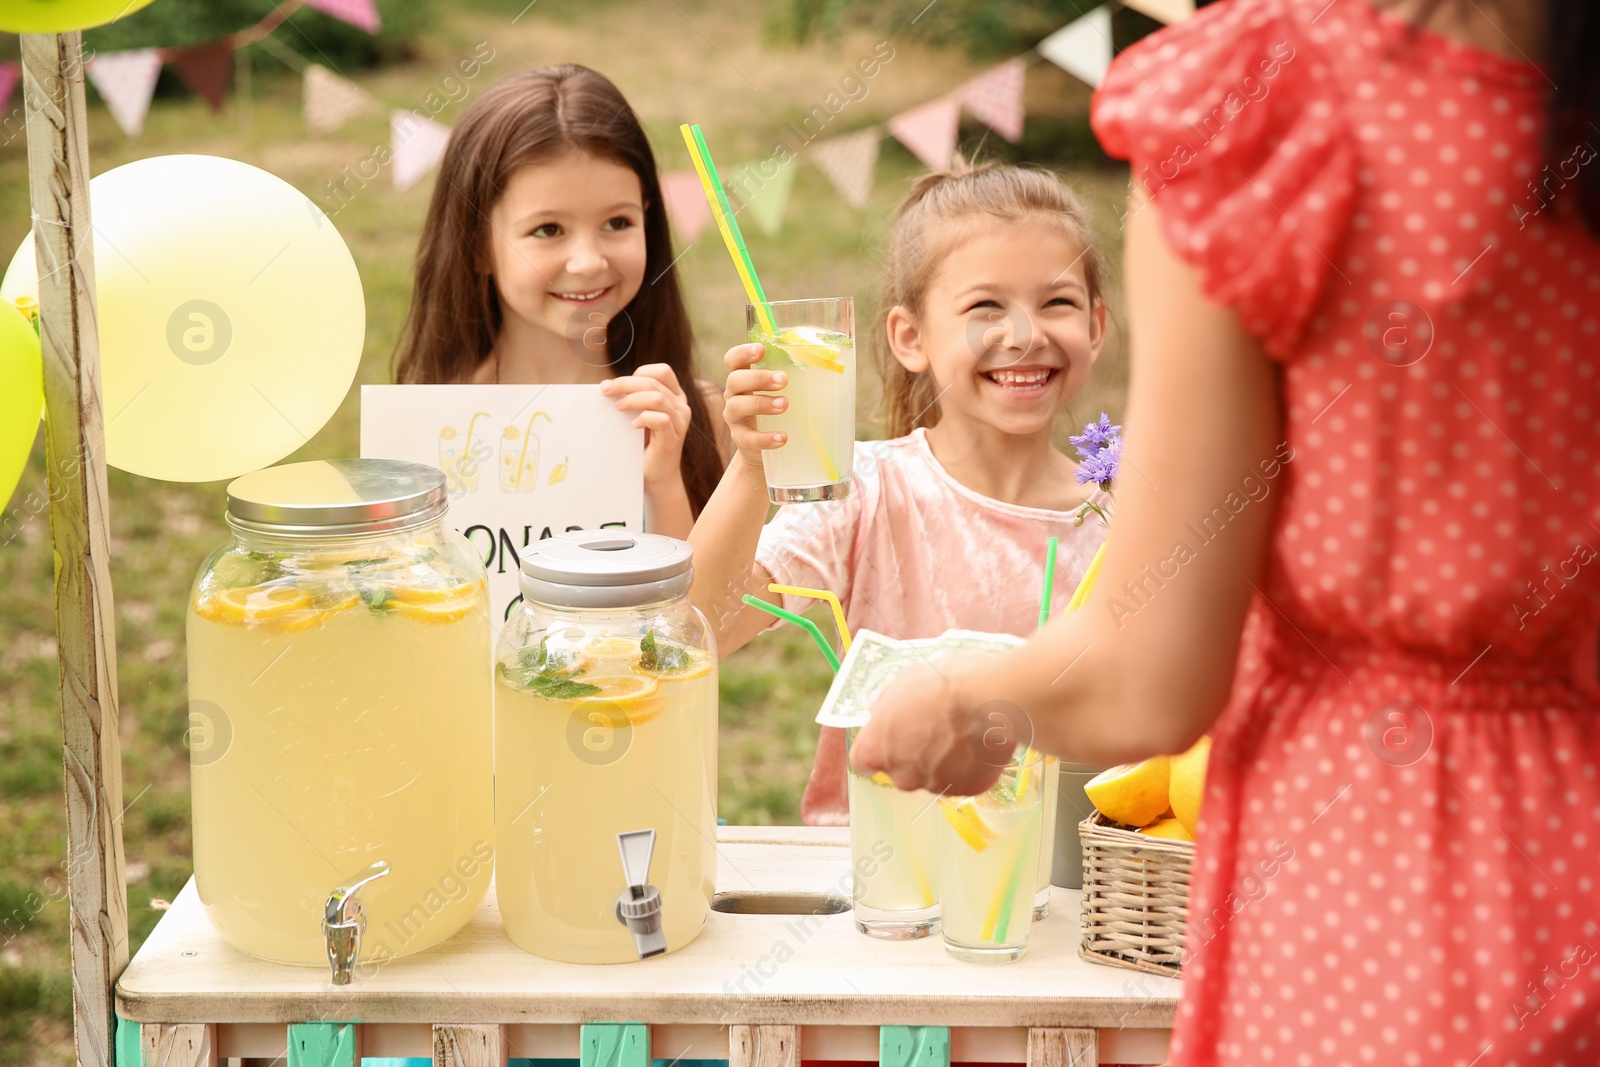 Photo of Little girls selling natural lemonade to woman at stand in park